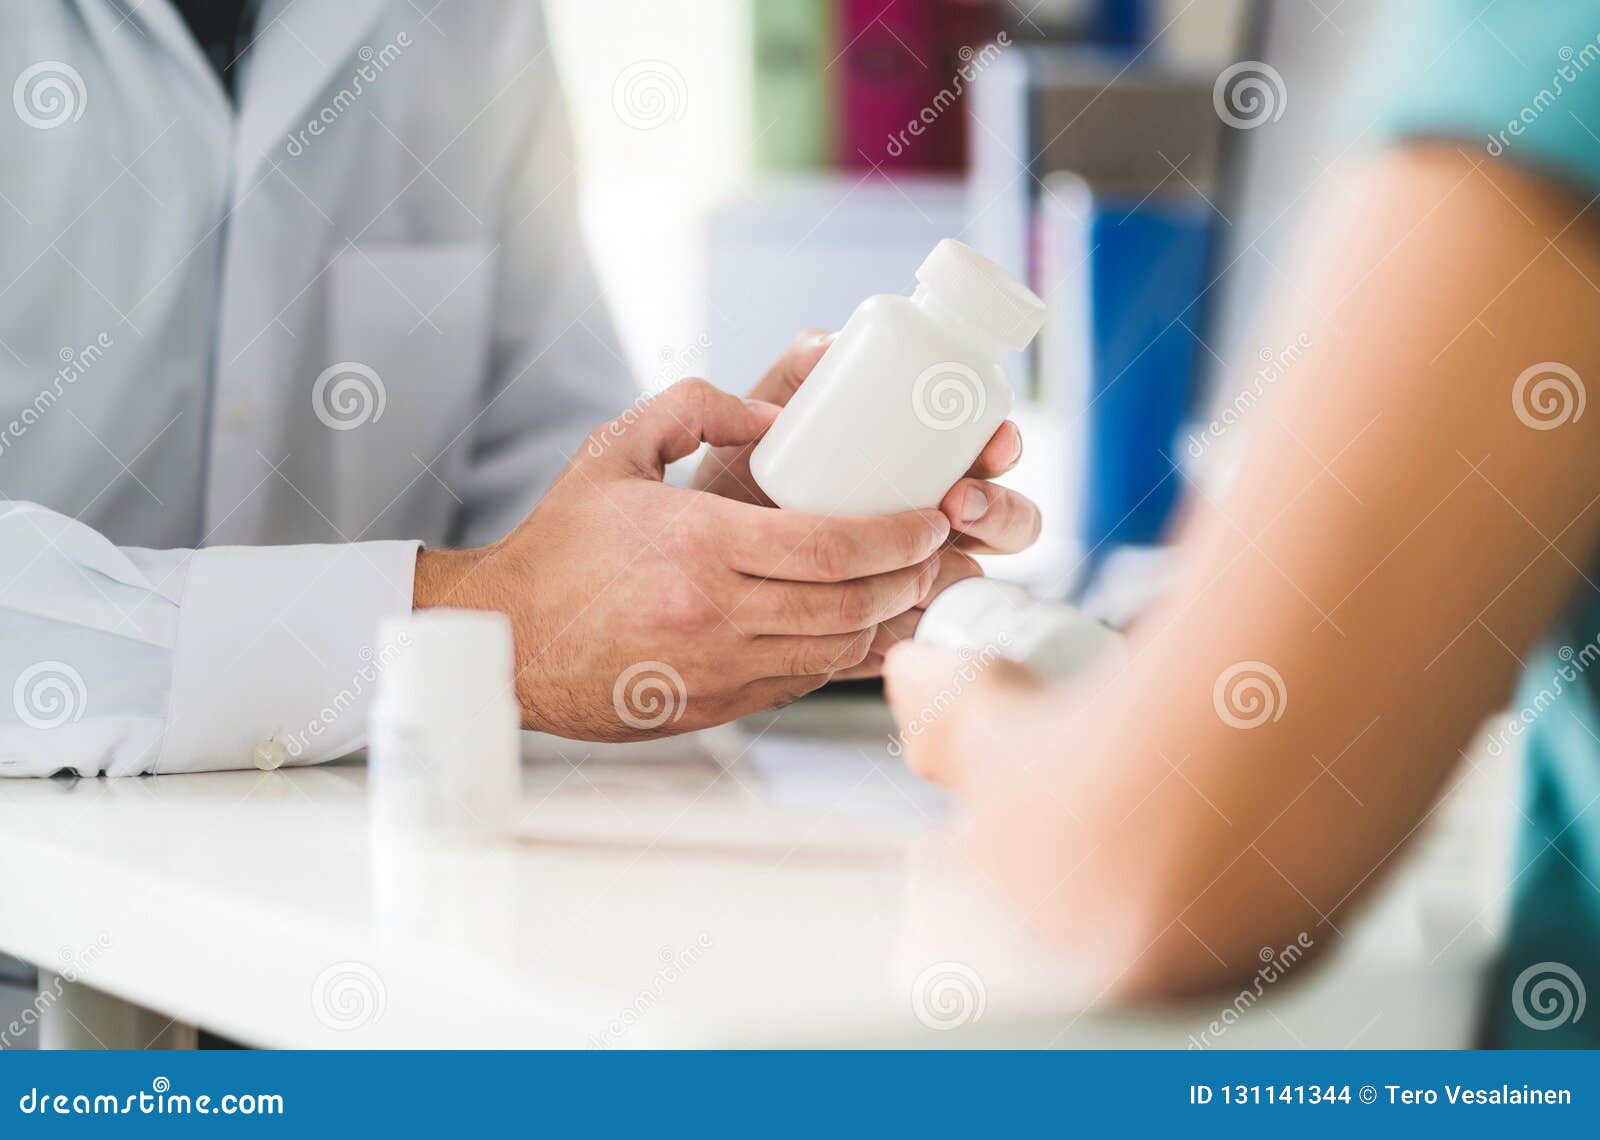 doctor consulting patient about right medication. physician holding medicine and pills in hand.